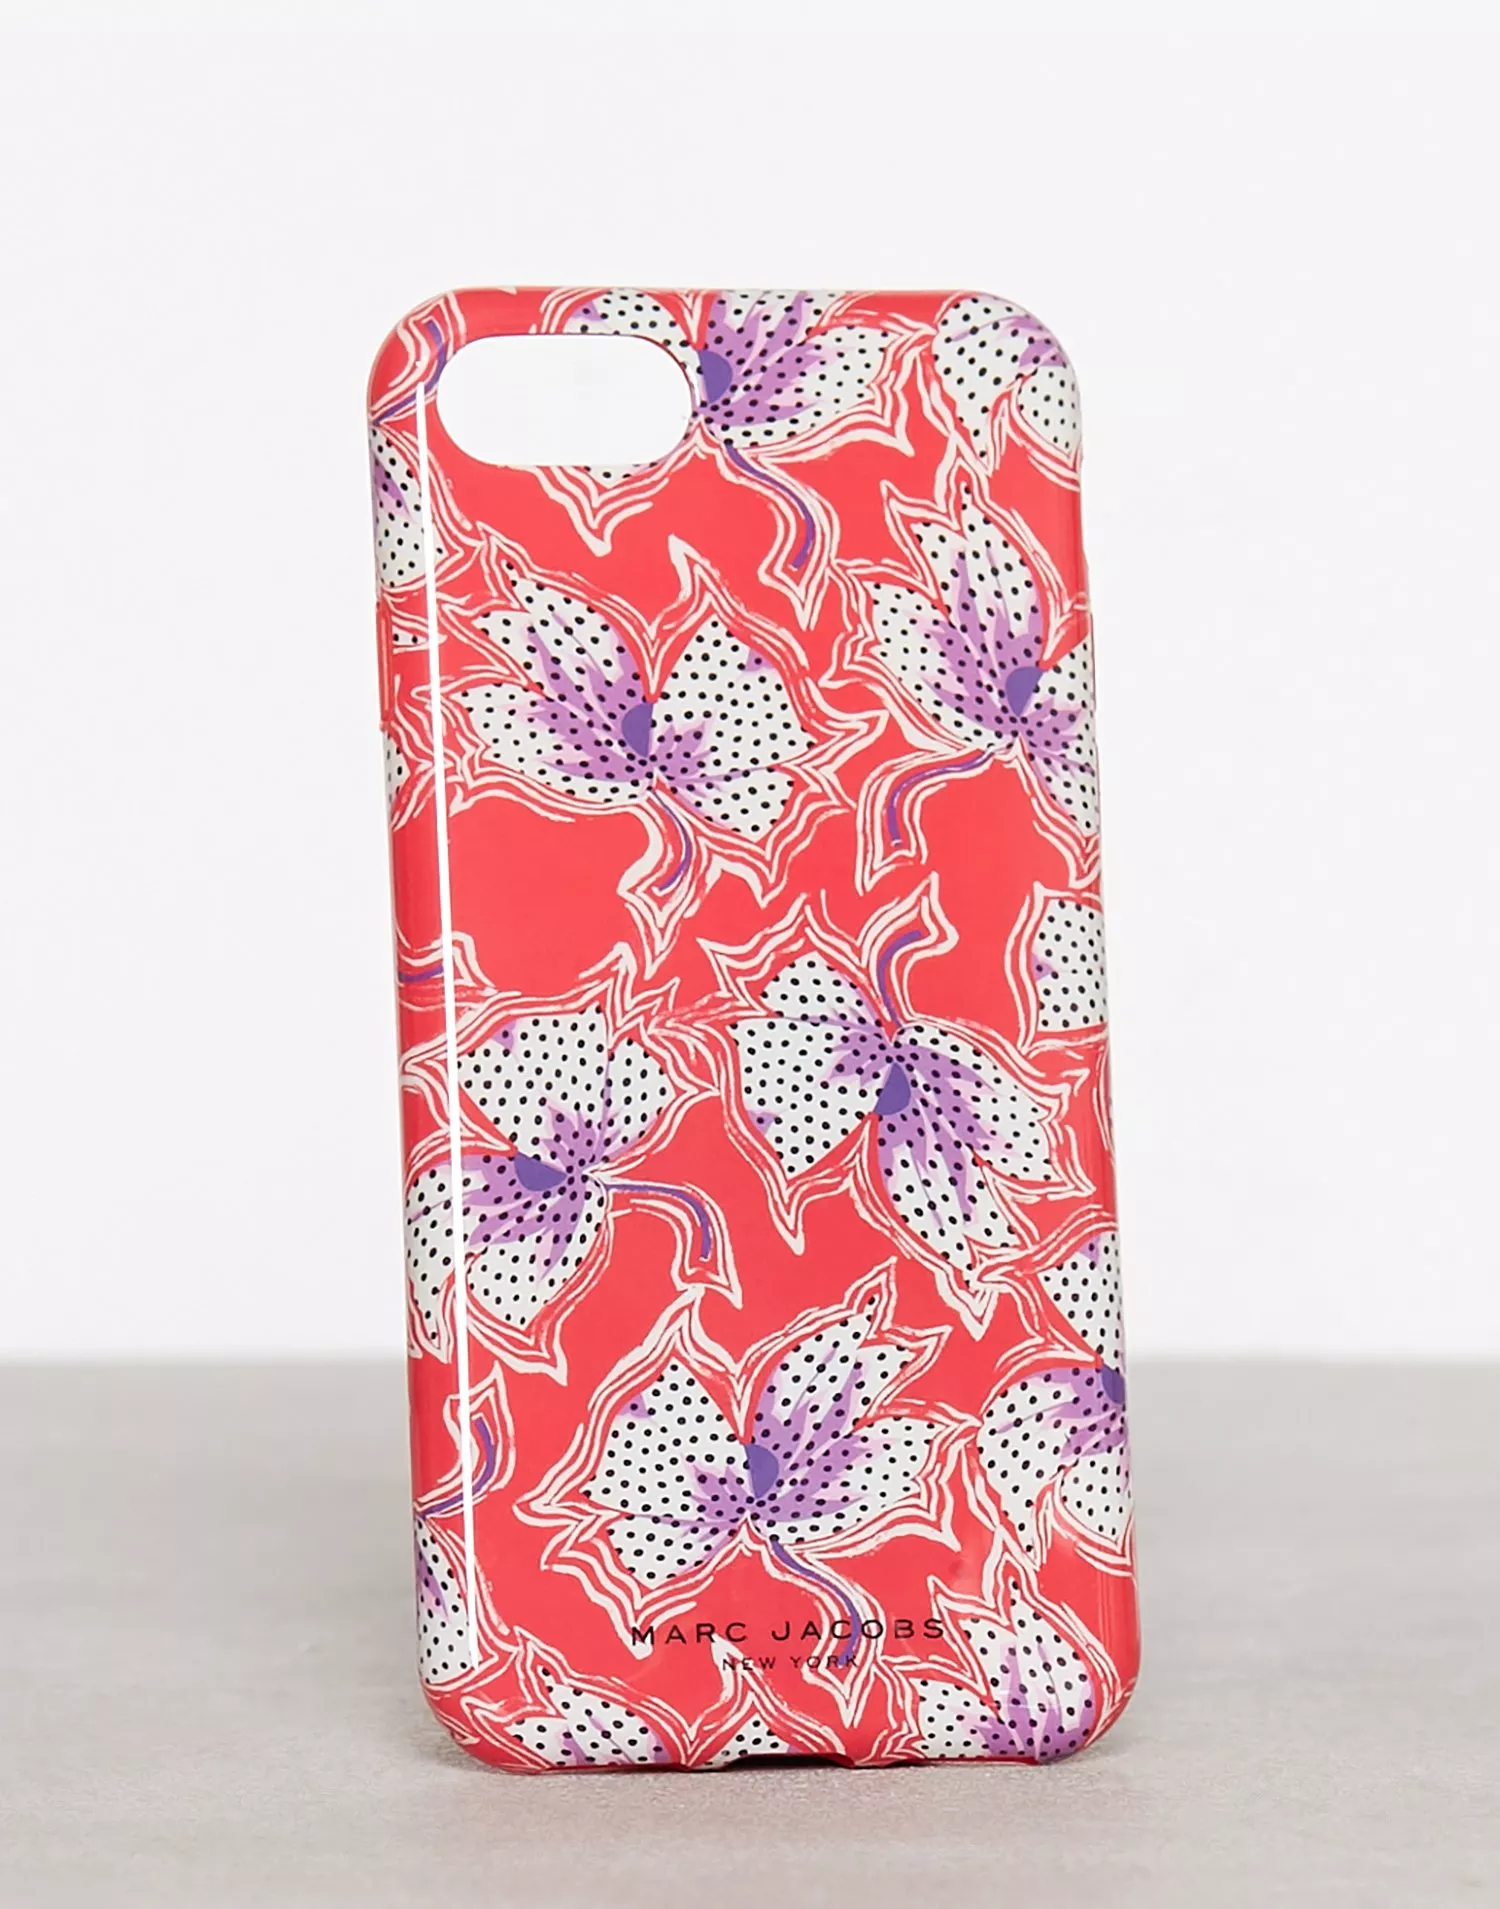 uddanne Robust wafer Buy Marc Jacobs (THE) IPHONE 7 CASE - Red Patterned | Nelly.com